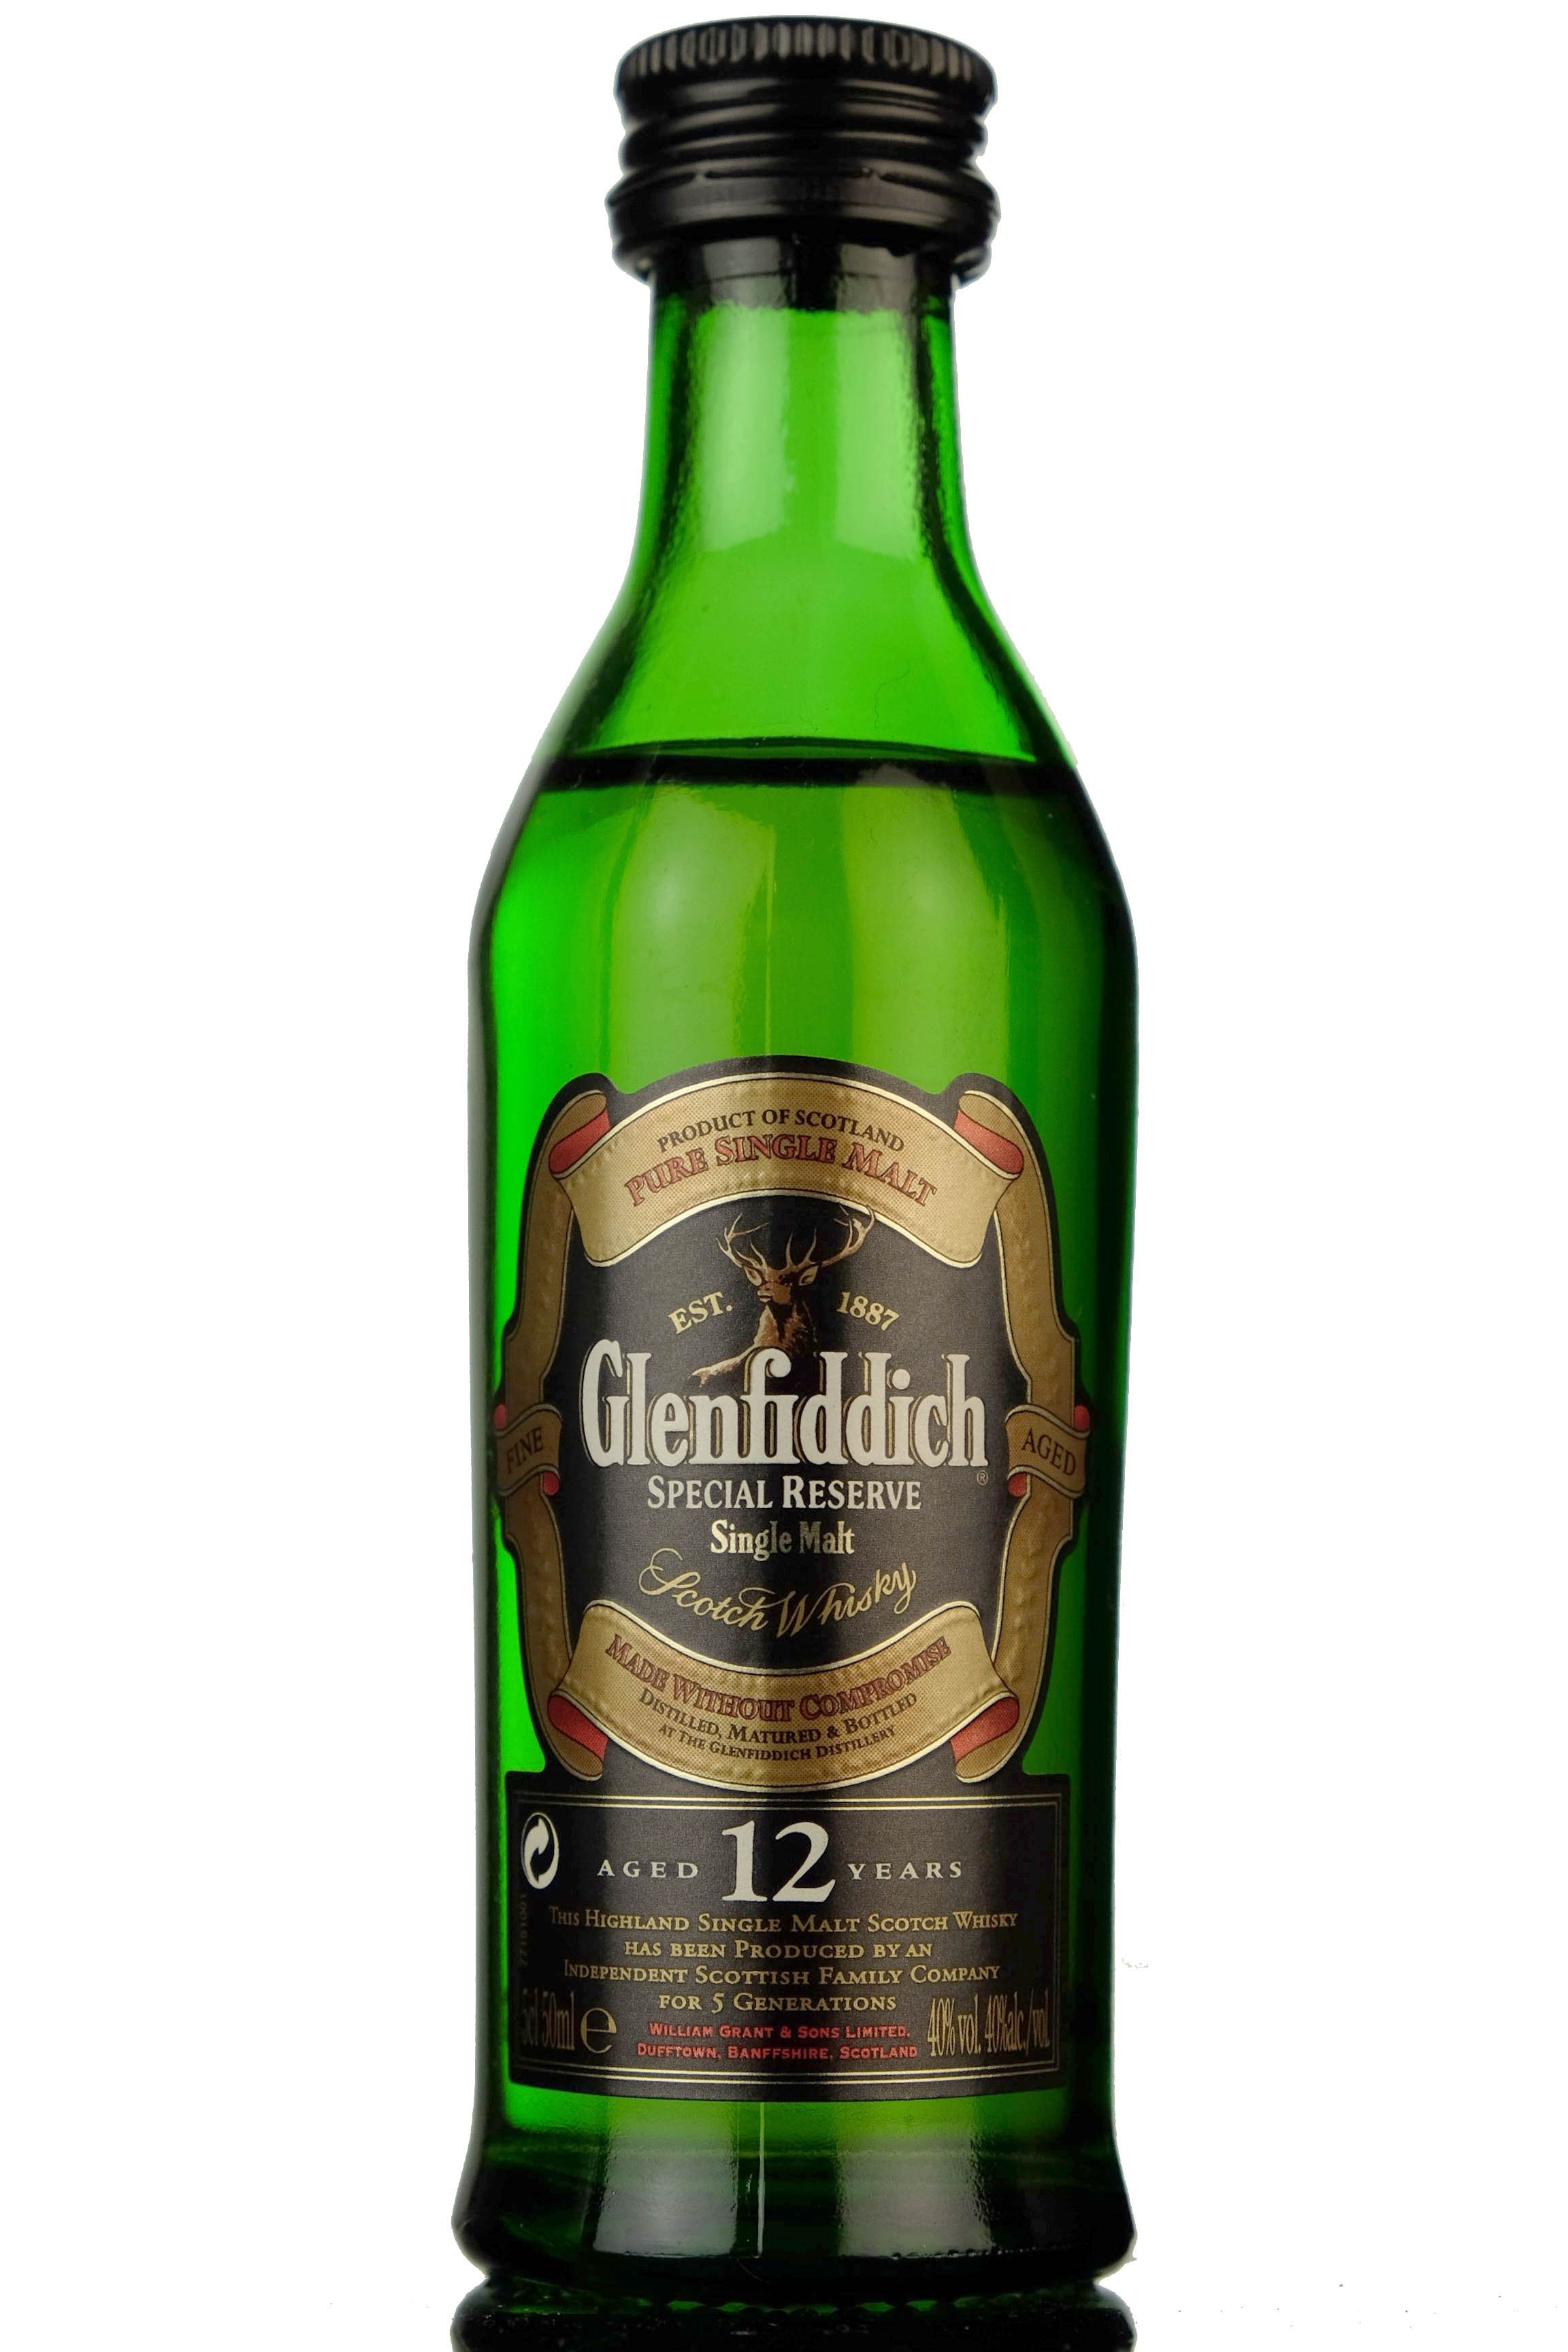 Glenfiddich 12 Year Old - Special Reserve Miniature